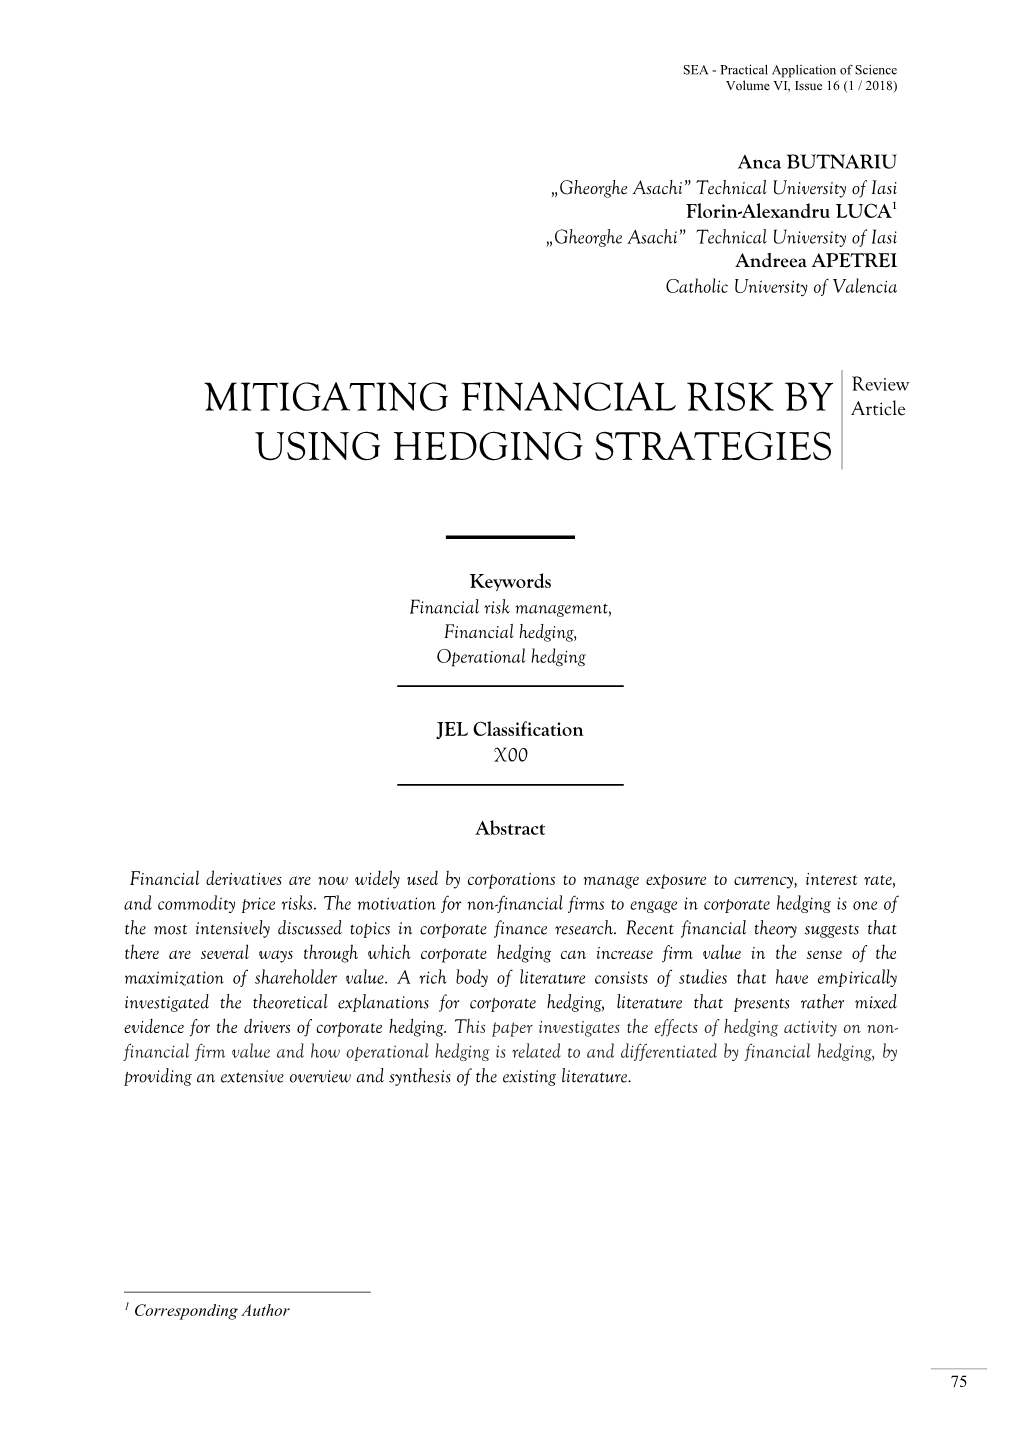 Mitigating Financial Risk by Using Hedging Strategies